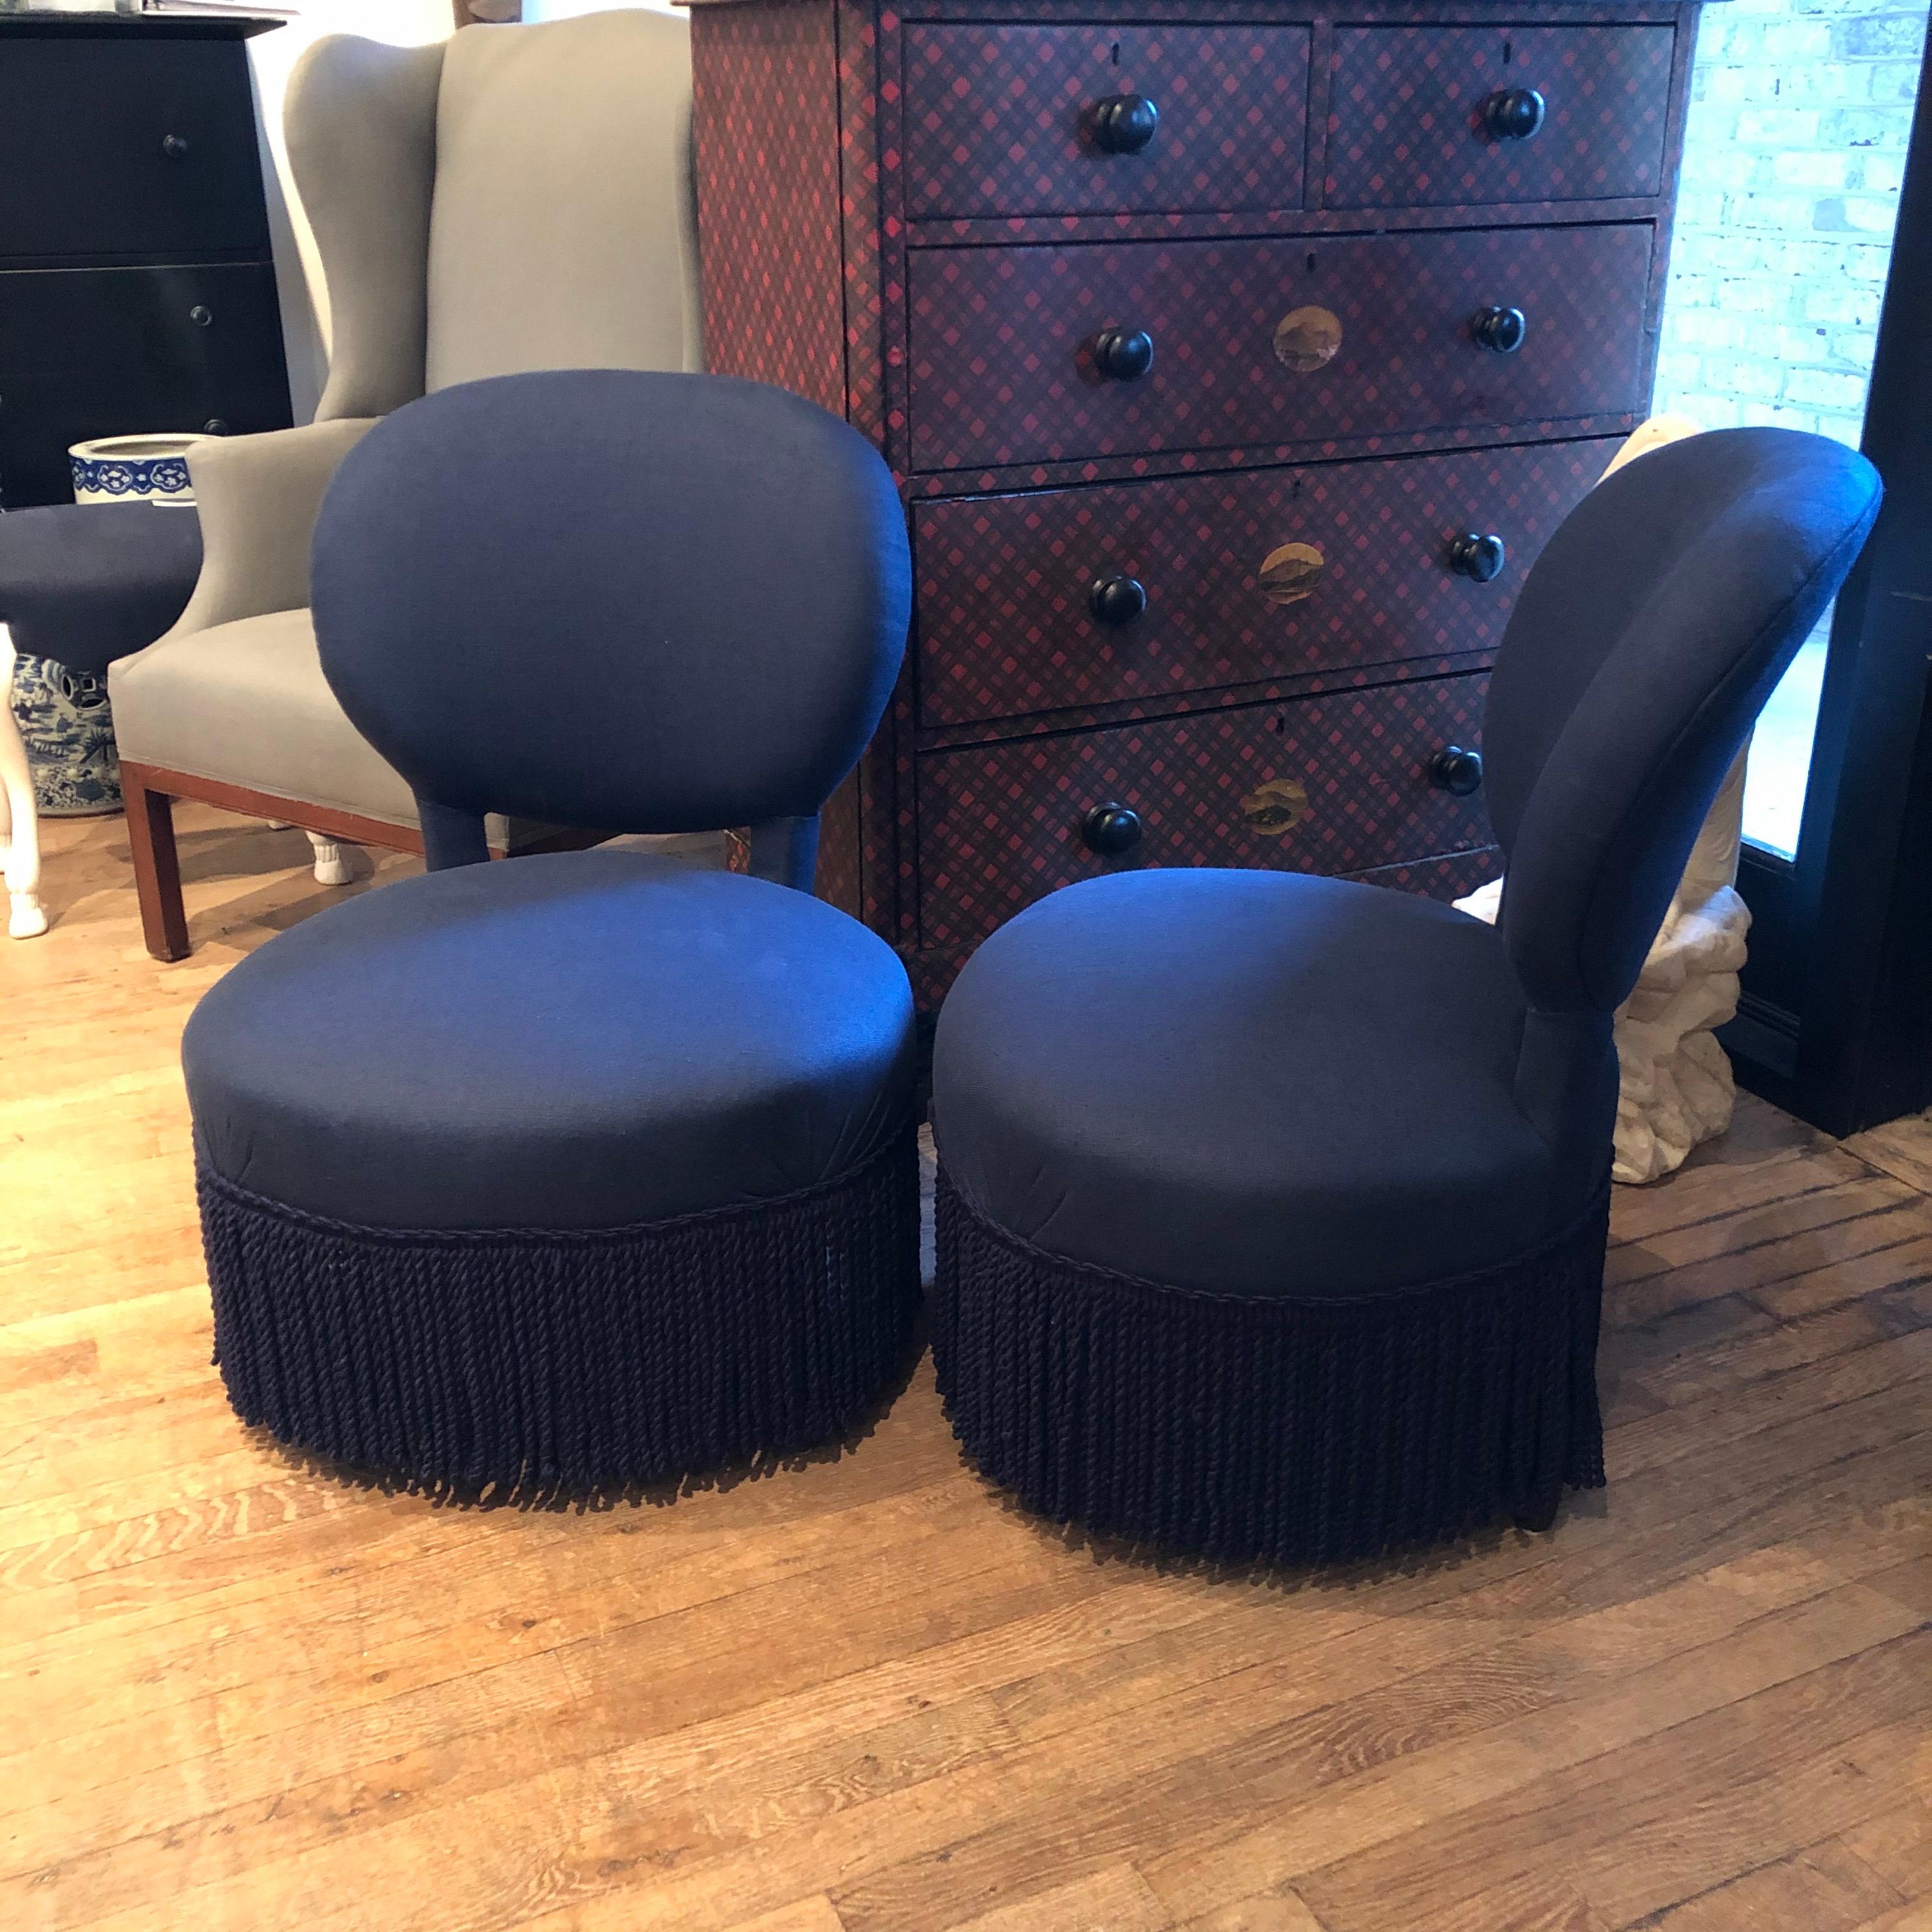 Pair of Louis style, Napoleonic slipper chairs newly upholstered midnight blue linen with coordinated bullion fringe.
       